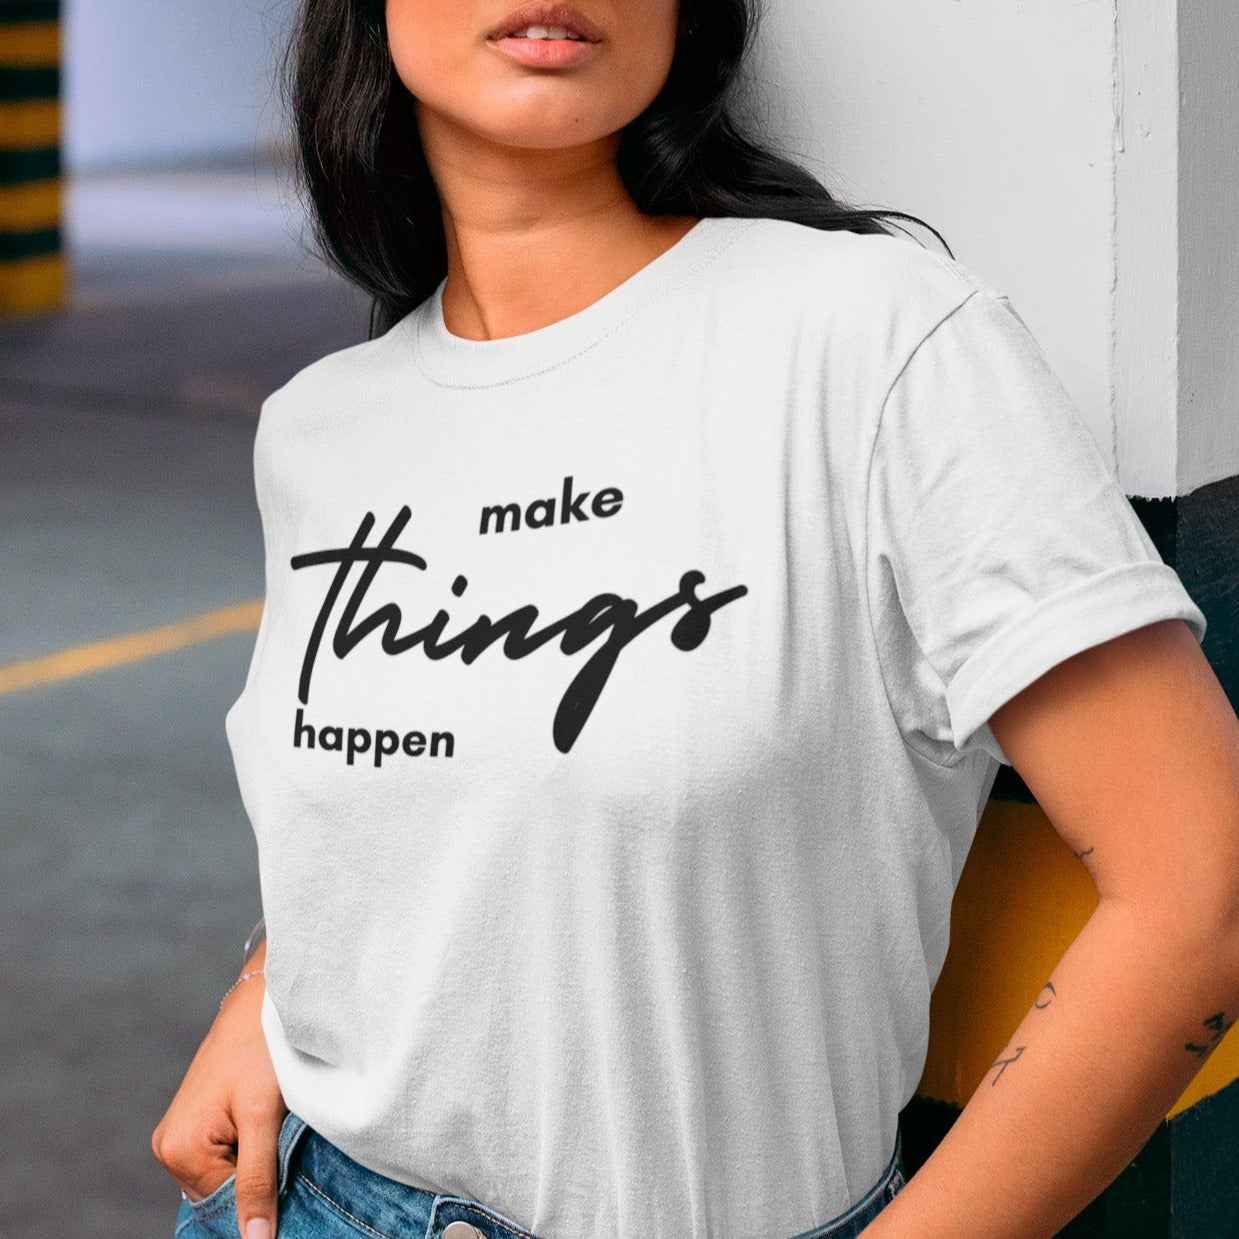 make-things-happen-white-t-shirt-women-inspiring-mockup-of-a-woman-wearing-a-tee-in-the-parking-lot